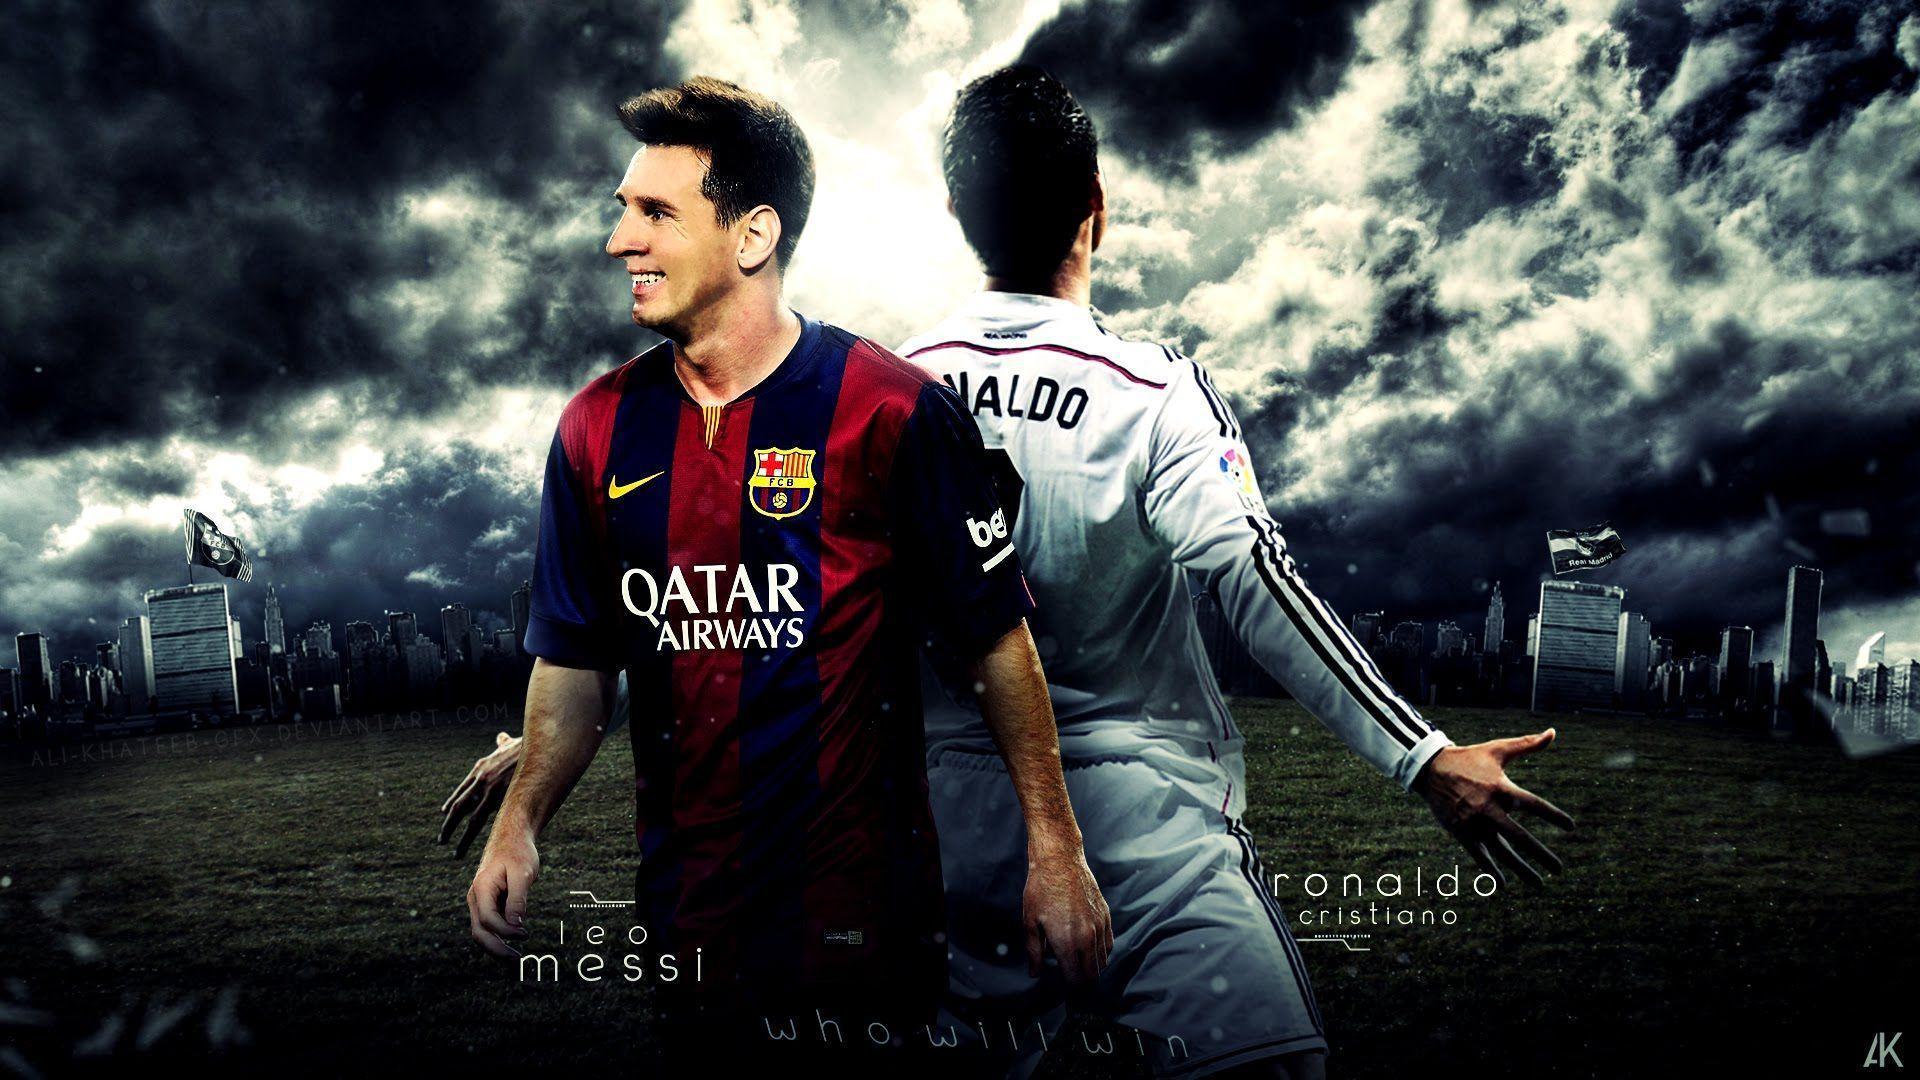 Messi and Ronaldo 4K pictures.jpg